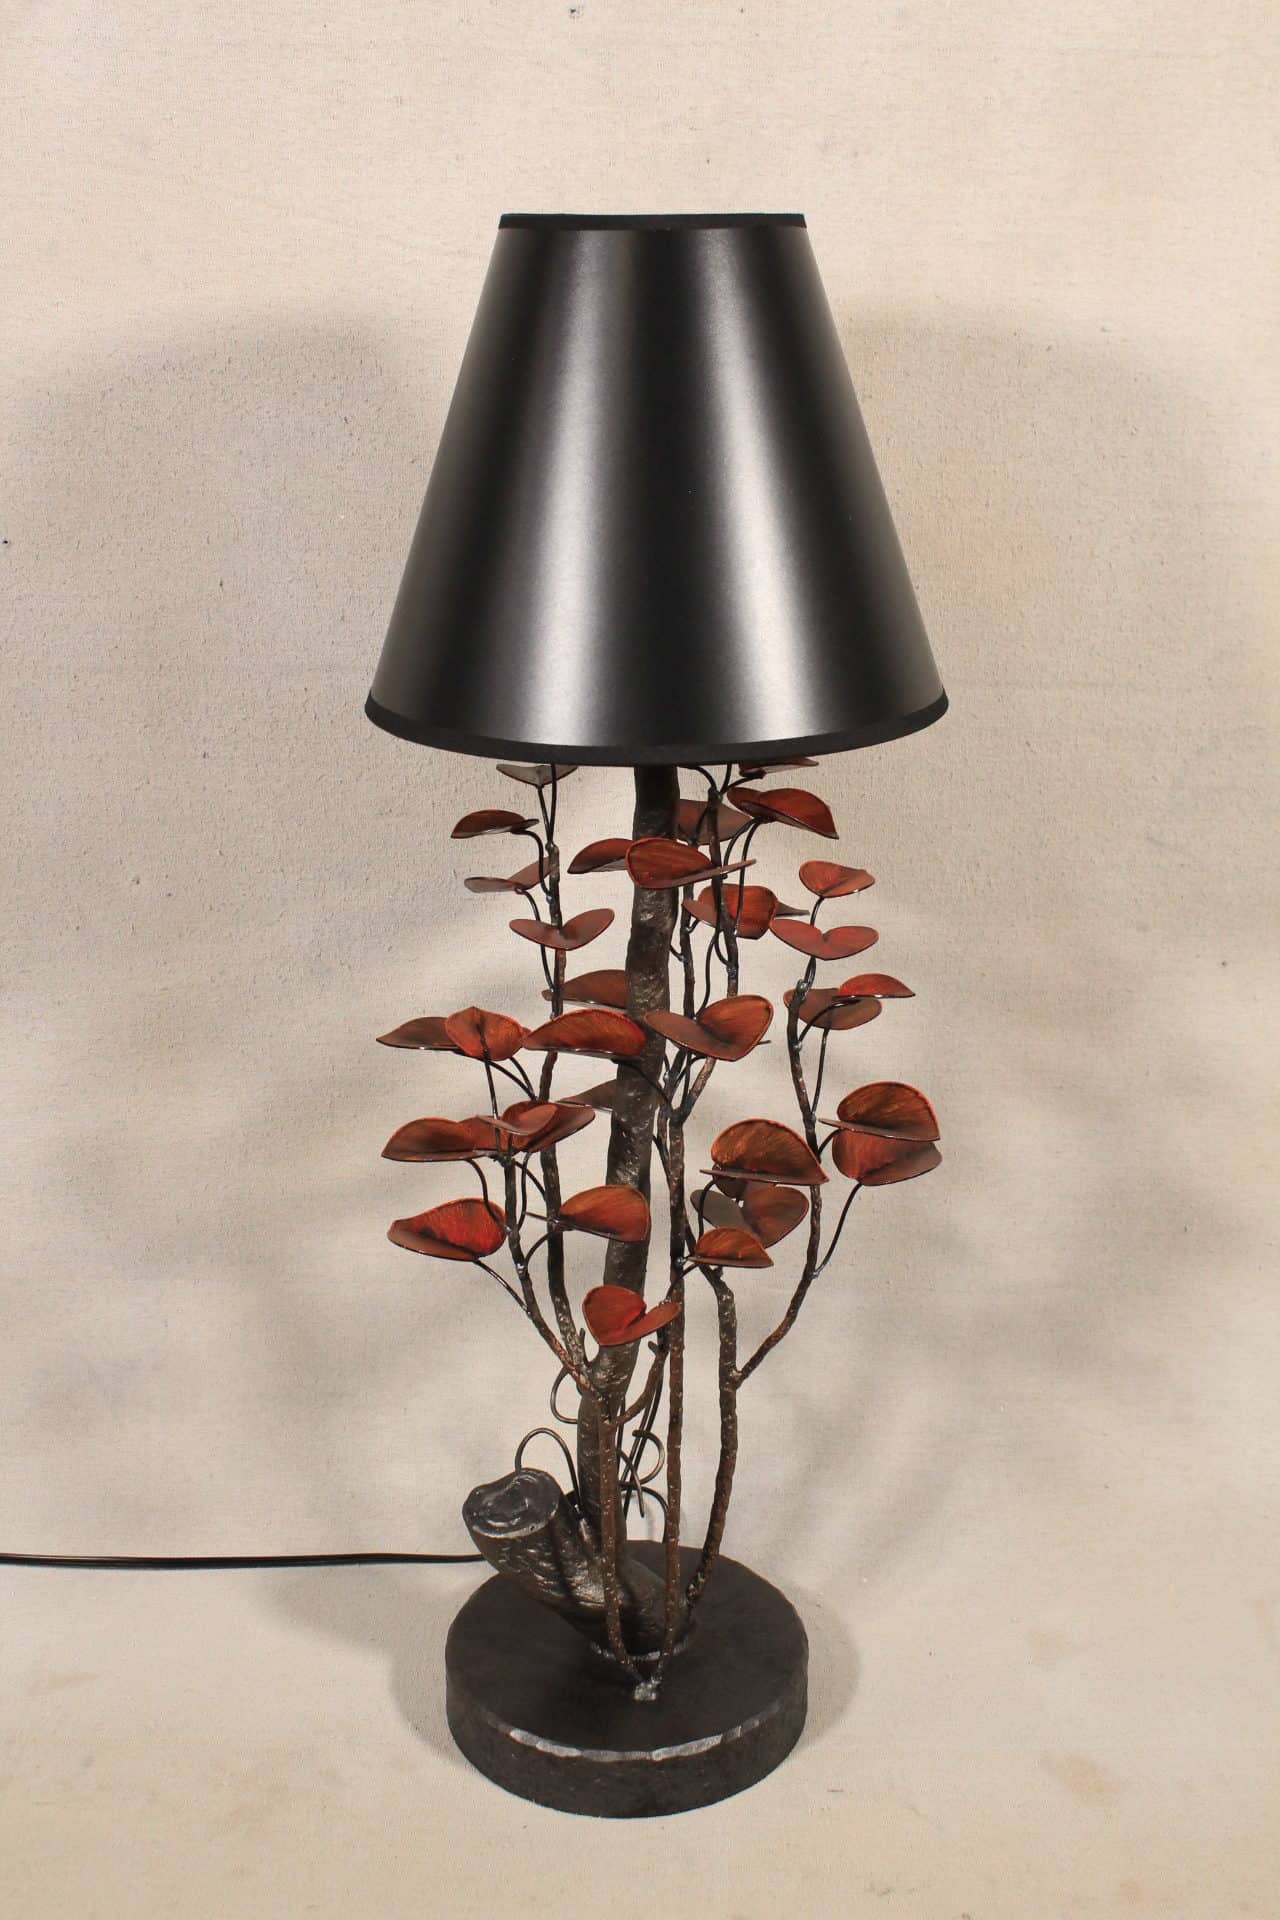 Morning Glory Lamp Table Lamp with Black Shade